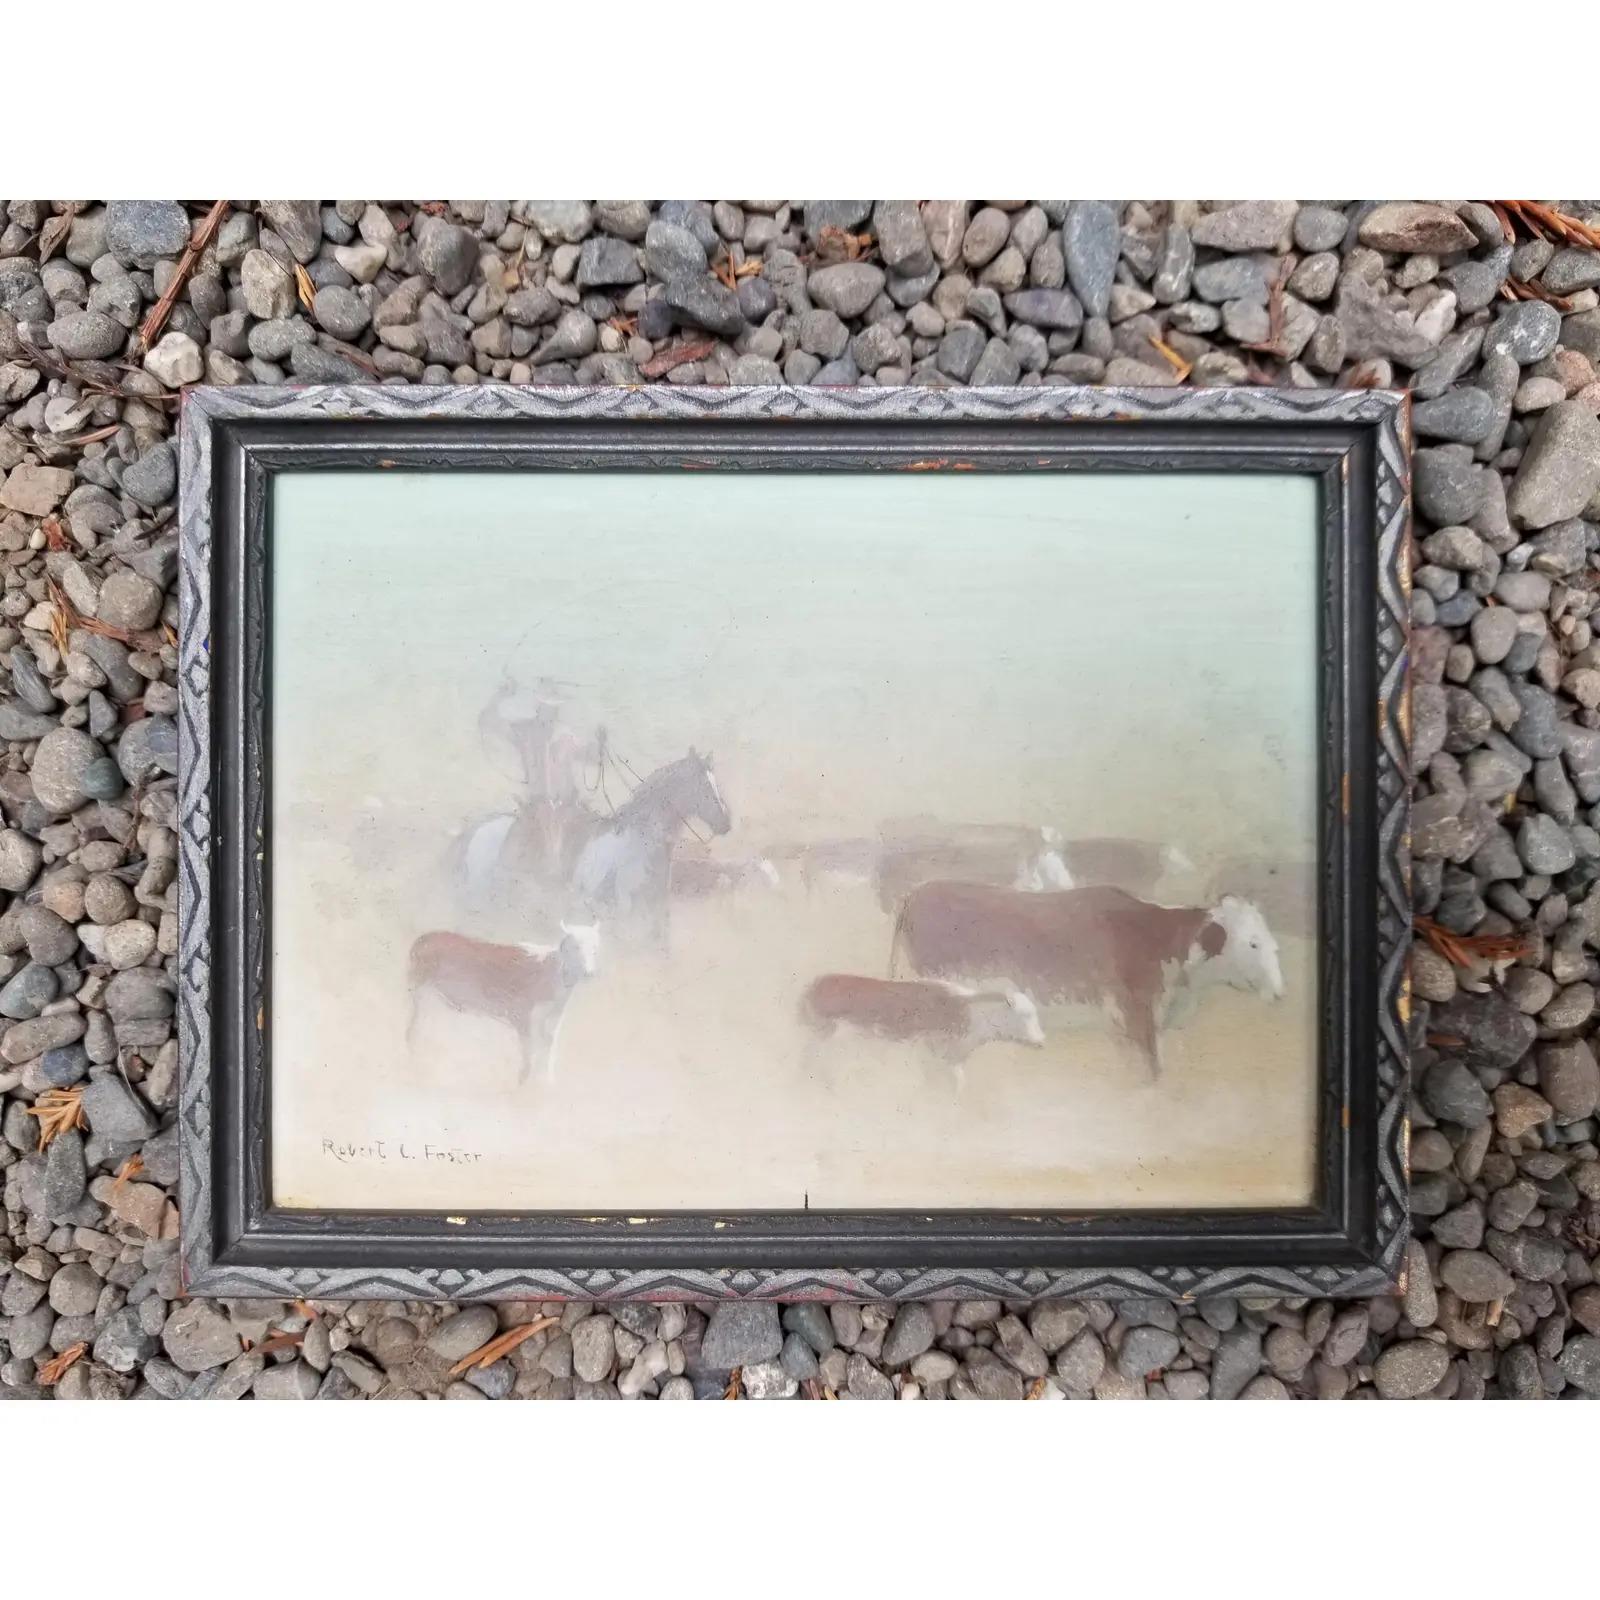 Original painting by California Artist Robert L. Foster. Painted on reverse Masonite with original vintage frame. Depicting a cattle drive with a cowboy on horse with lasso.

Robert L. Foster:
Welcome to Robert Foster's gallery of art. 